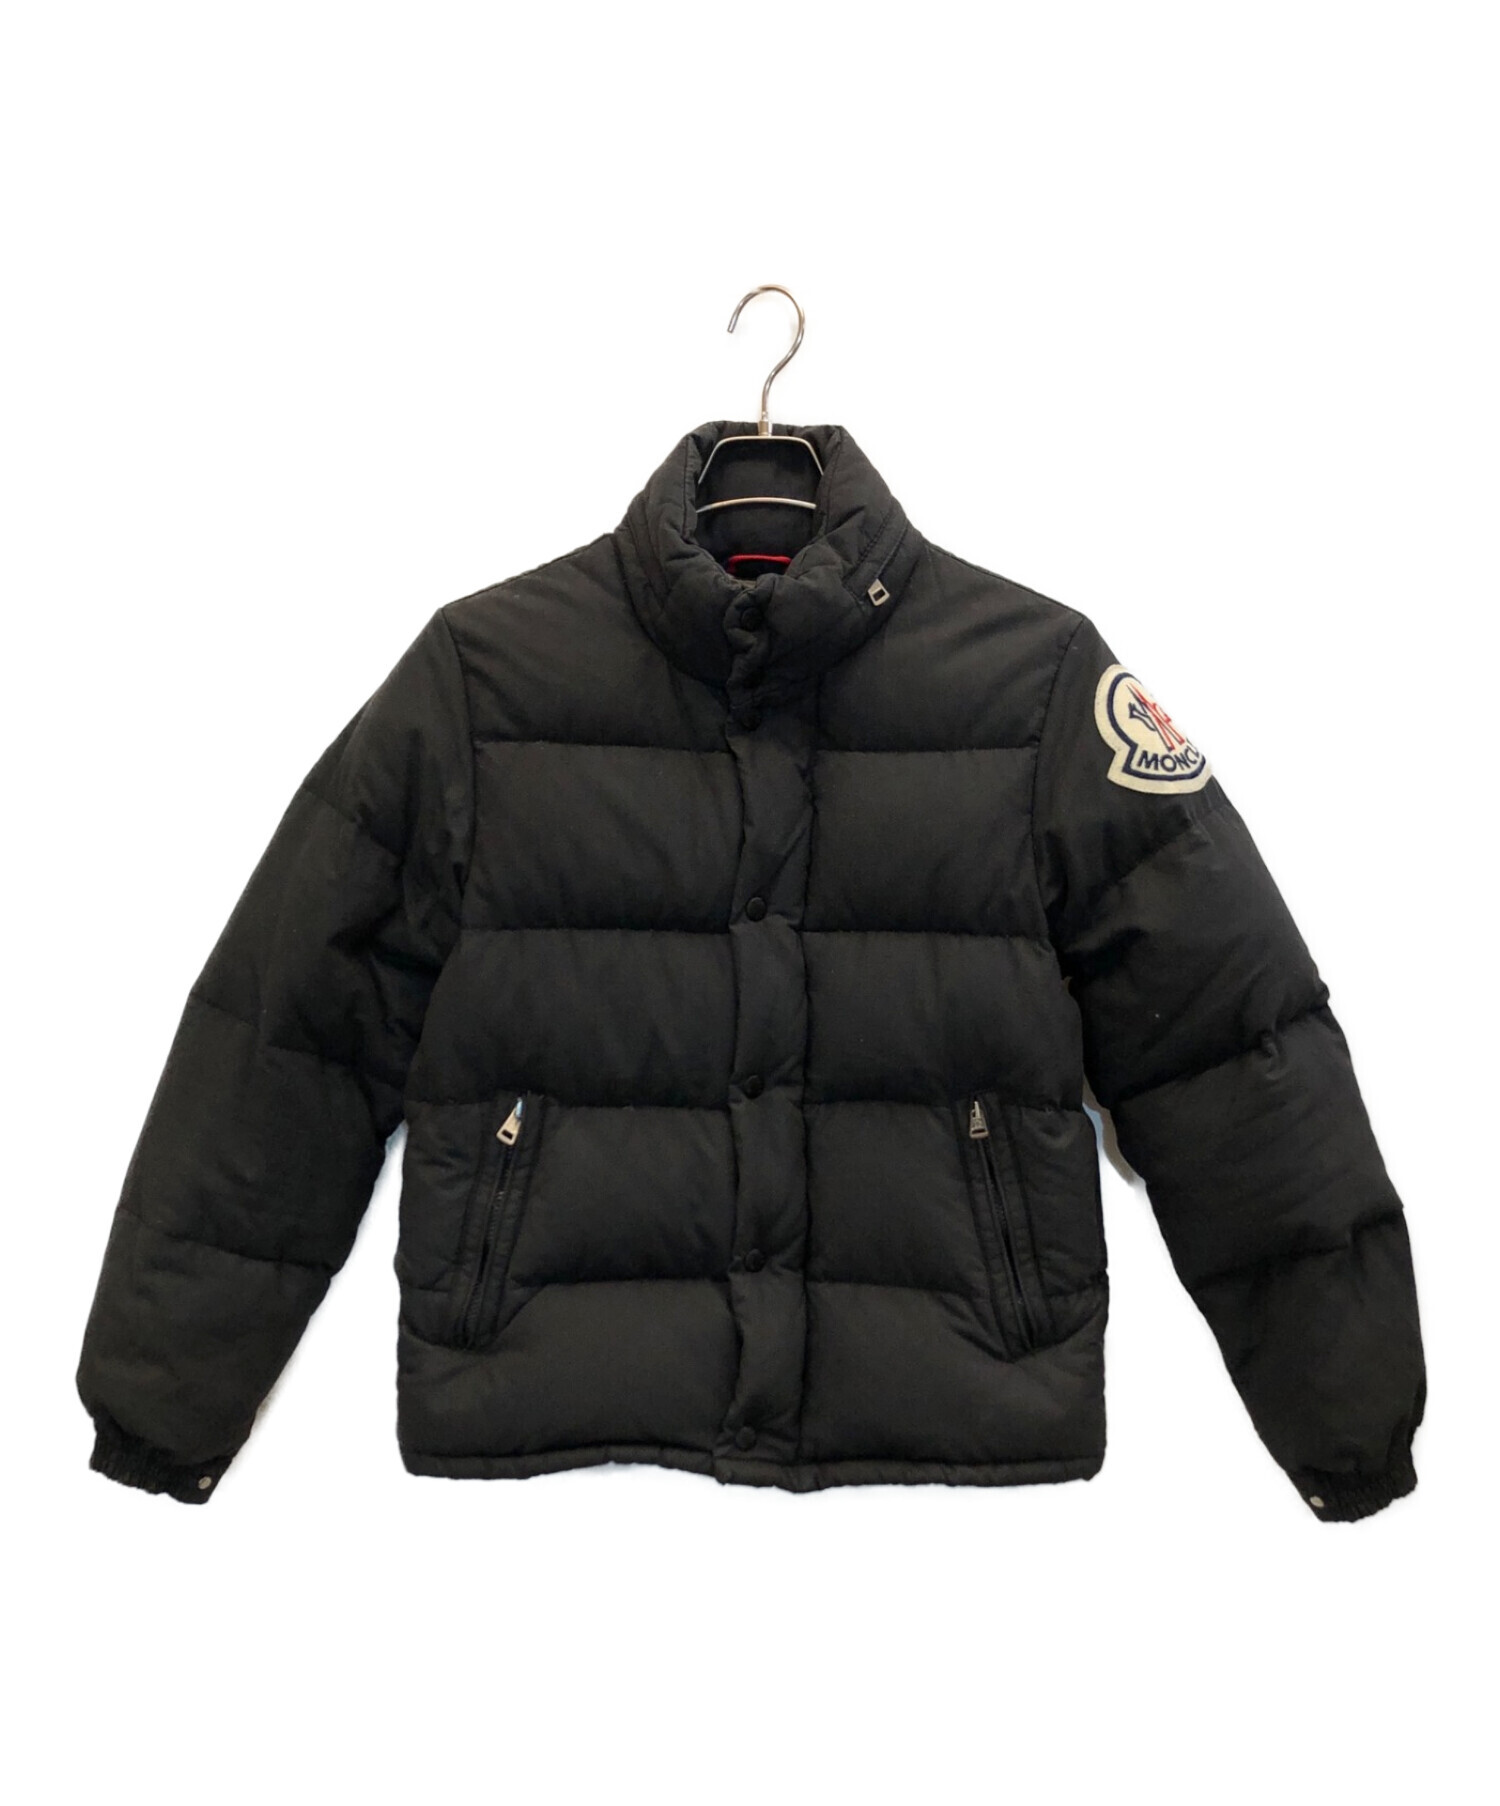 MONCLER COMME des GARCONS ジュンヤワタナベ  S使用感少ないです